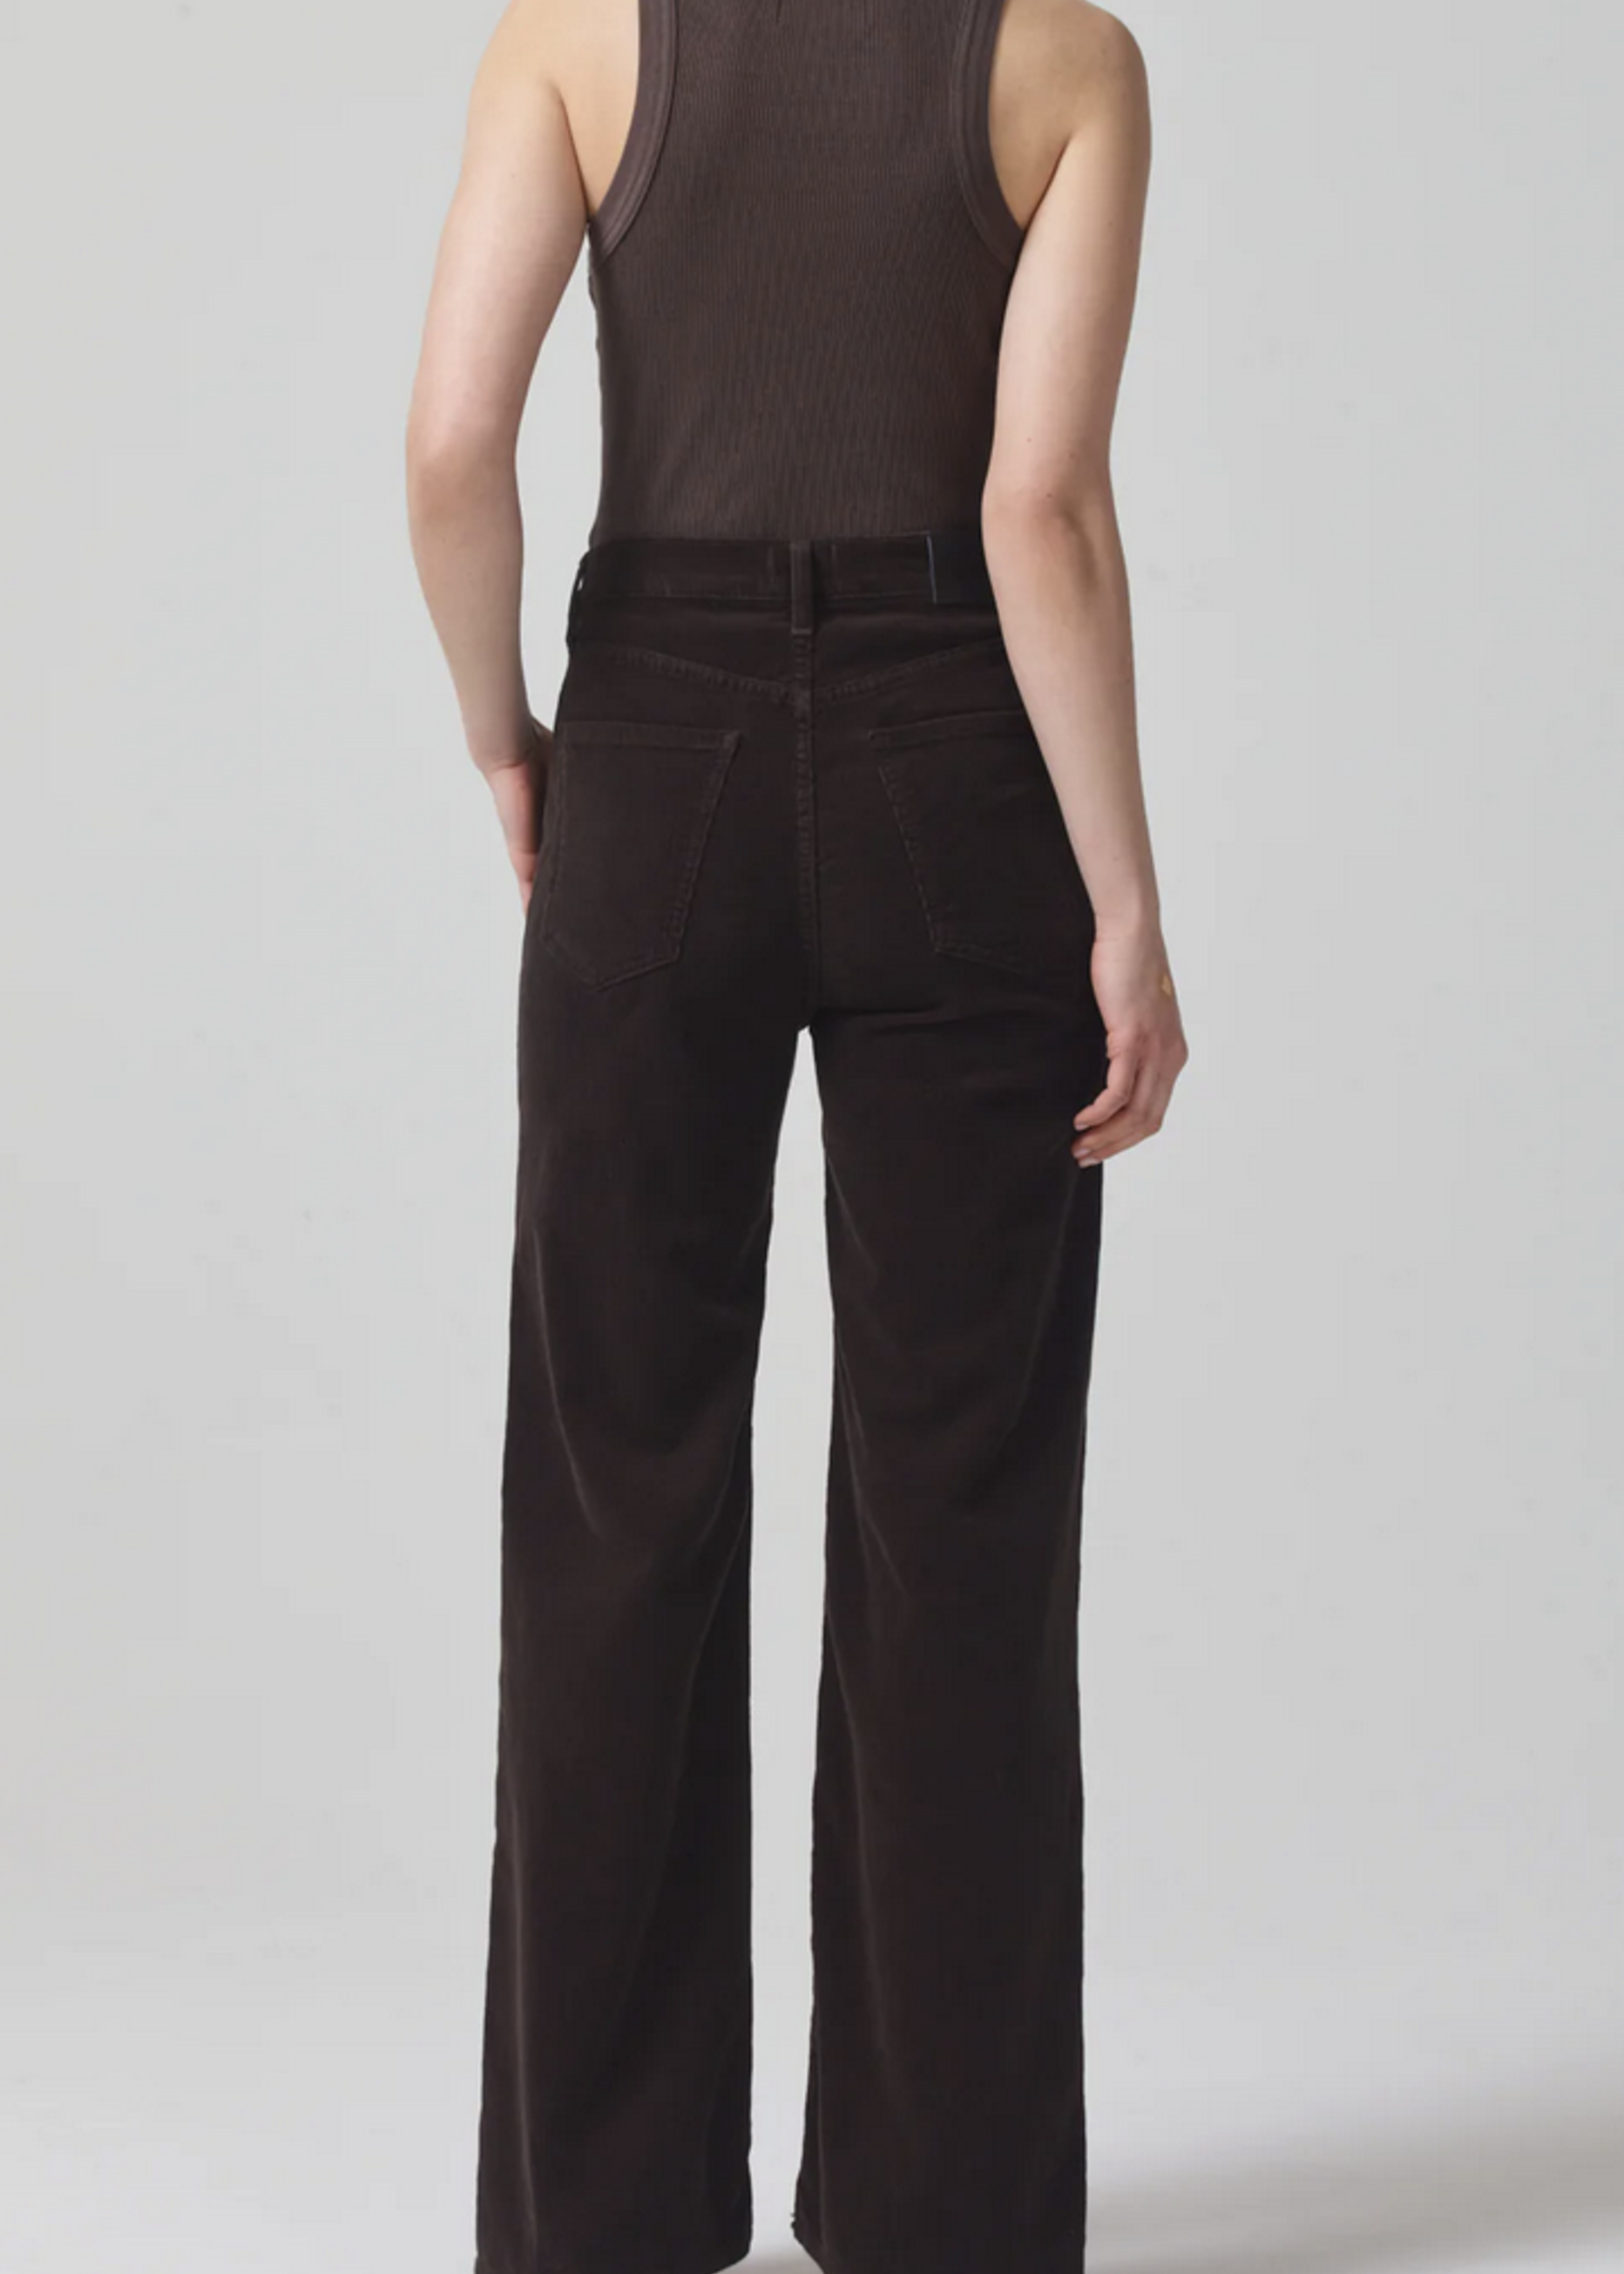 CITIZENS OF HUMANITY PALOMA BAGGY CORDUROY PANT